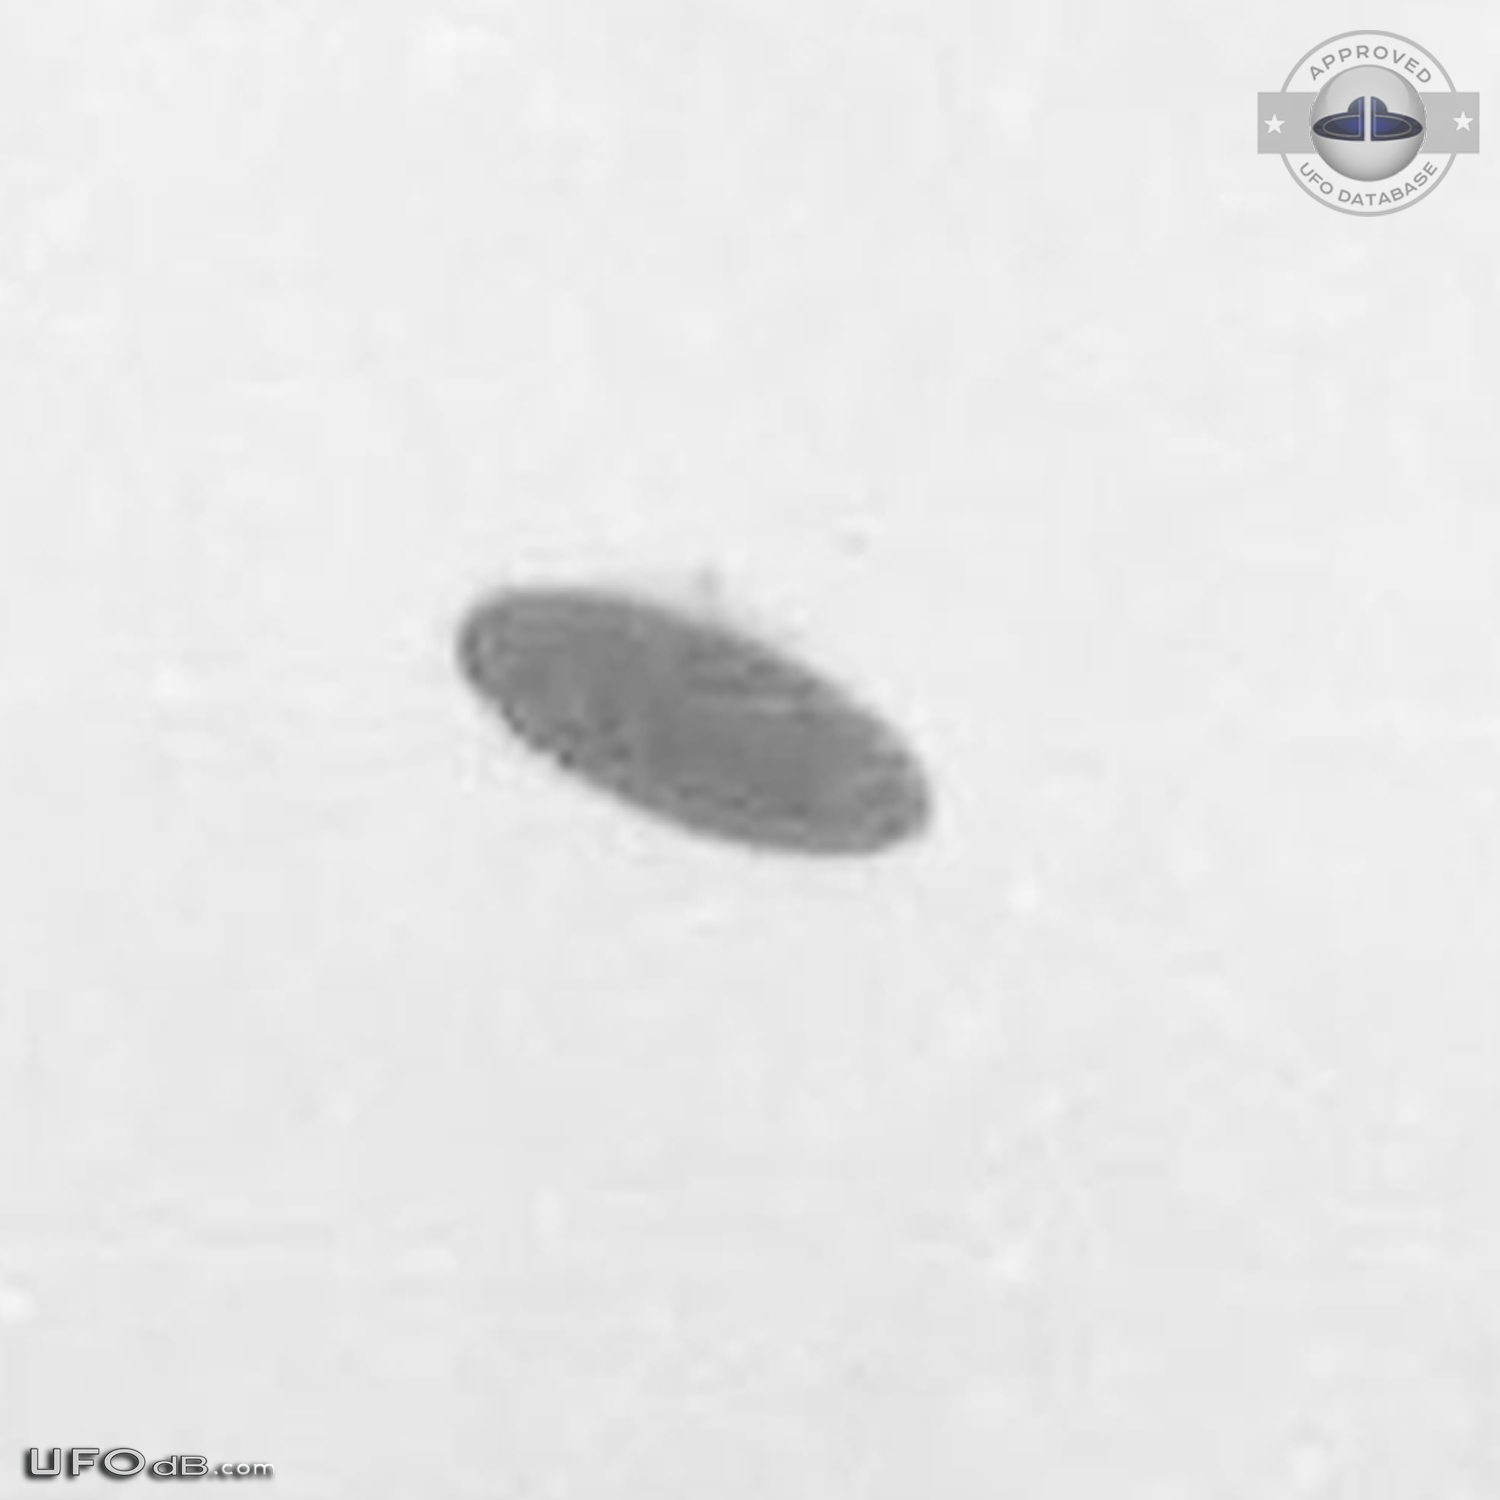 One of the Best UFO picture of all time - 1950 McMinnville, Oregon UFO Picture #423-6